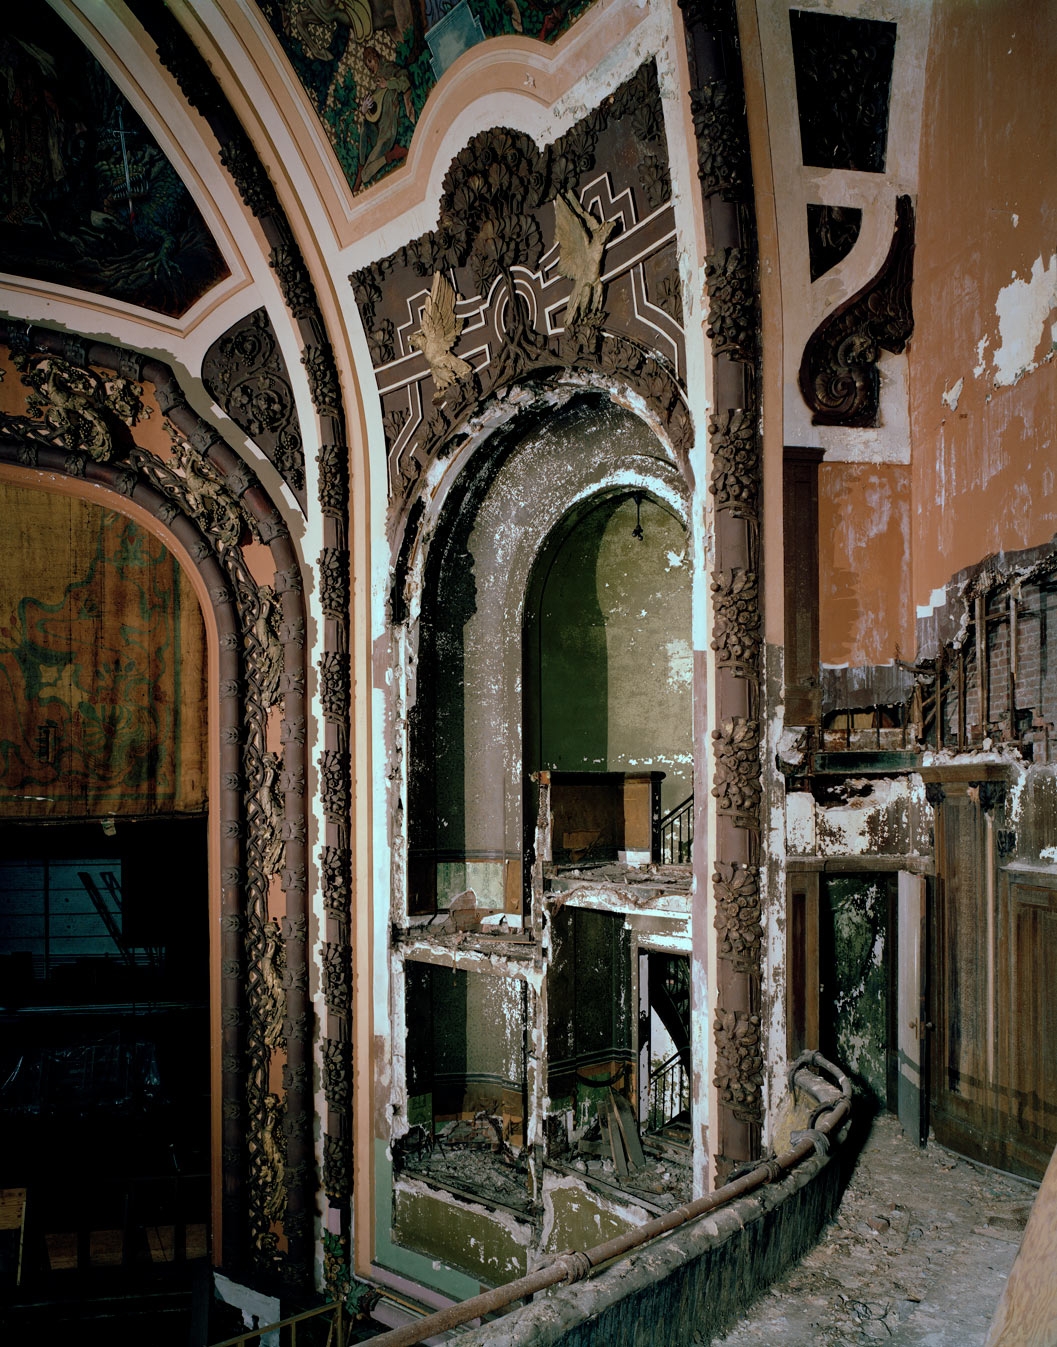 Interior of the New Amsterdam Theatre, before renovations began. The theater was in the worst shape of all the renovated theaters. Image: Whitney Cox.